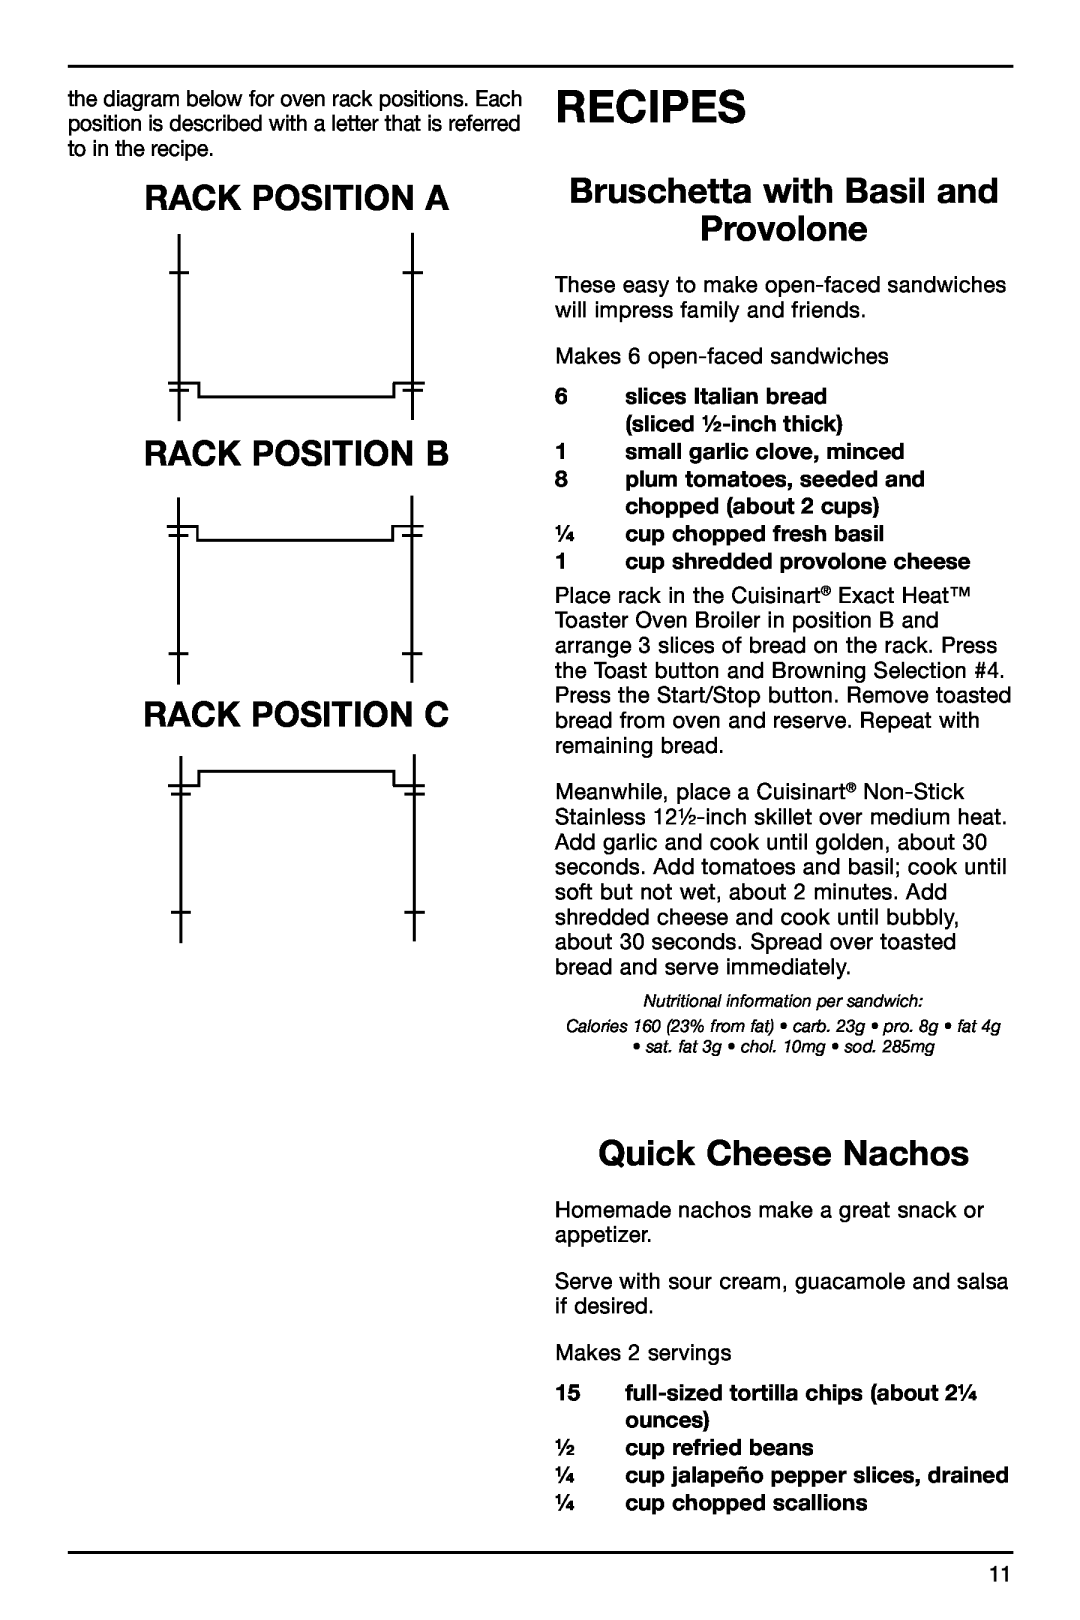 Cuisinart TOB-155 manual Rack Position A Rack Position B Rack Position C, Bruschetta with Basil and Provolone, Recipes 